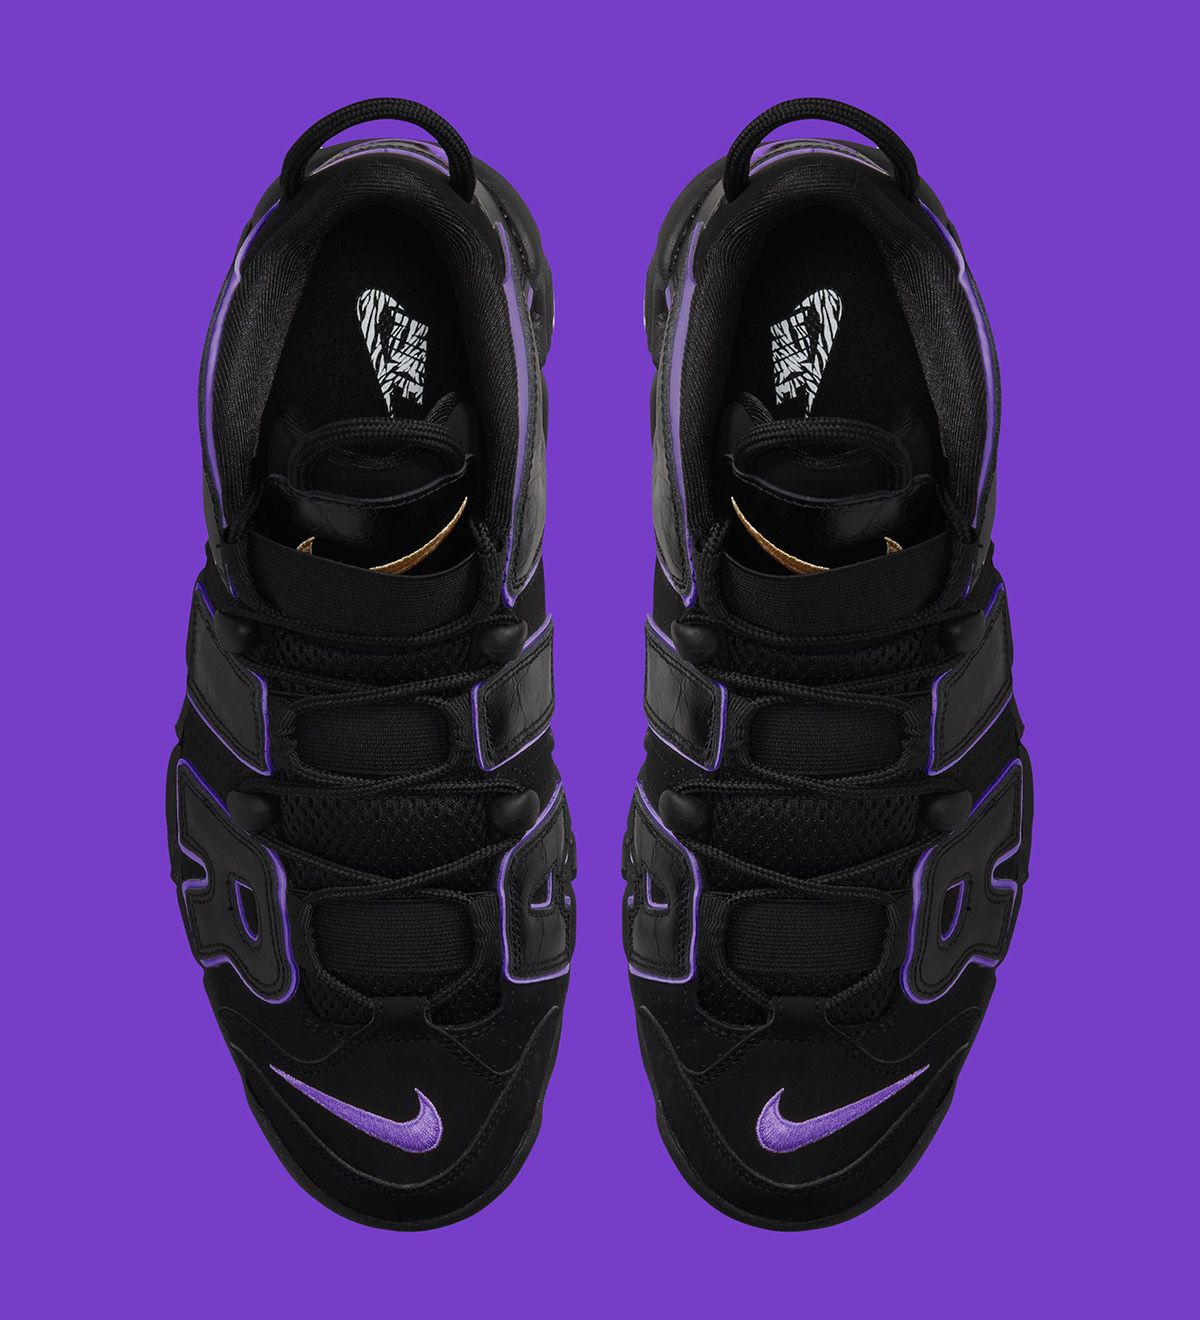 First Looks // Nike Air More Uptempo “Lakers” | LaptrinhX / News